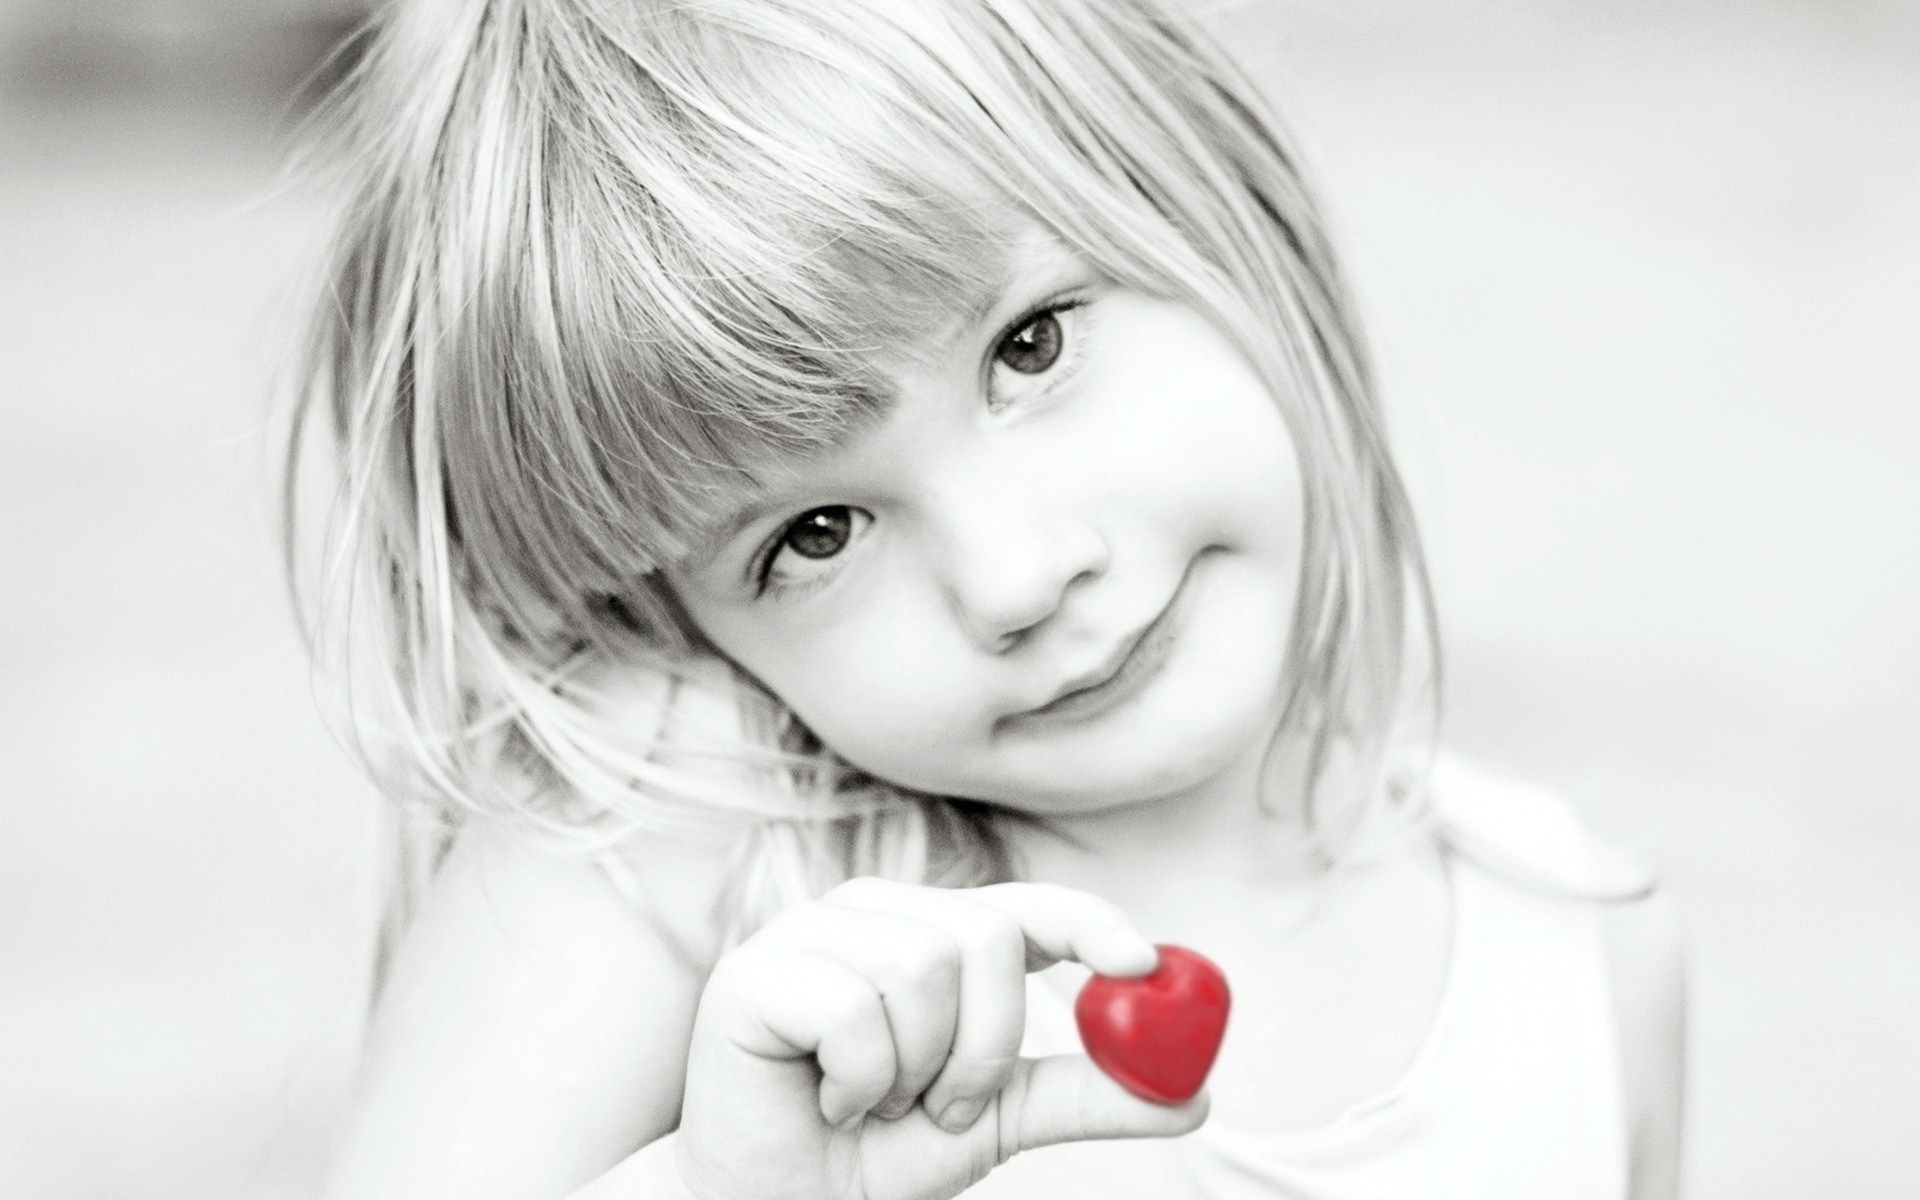 Child Girl With Red Heart Wallpaper Cute Baby Backgrounds